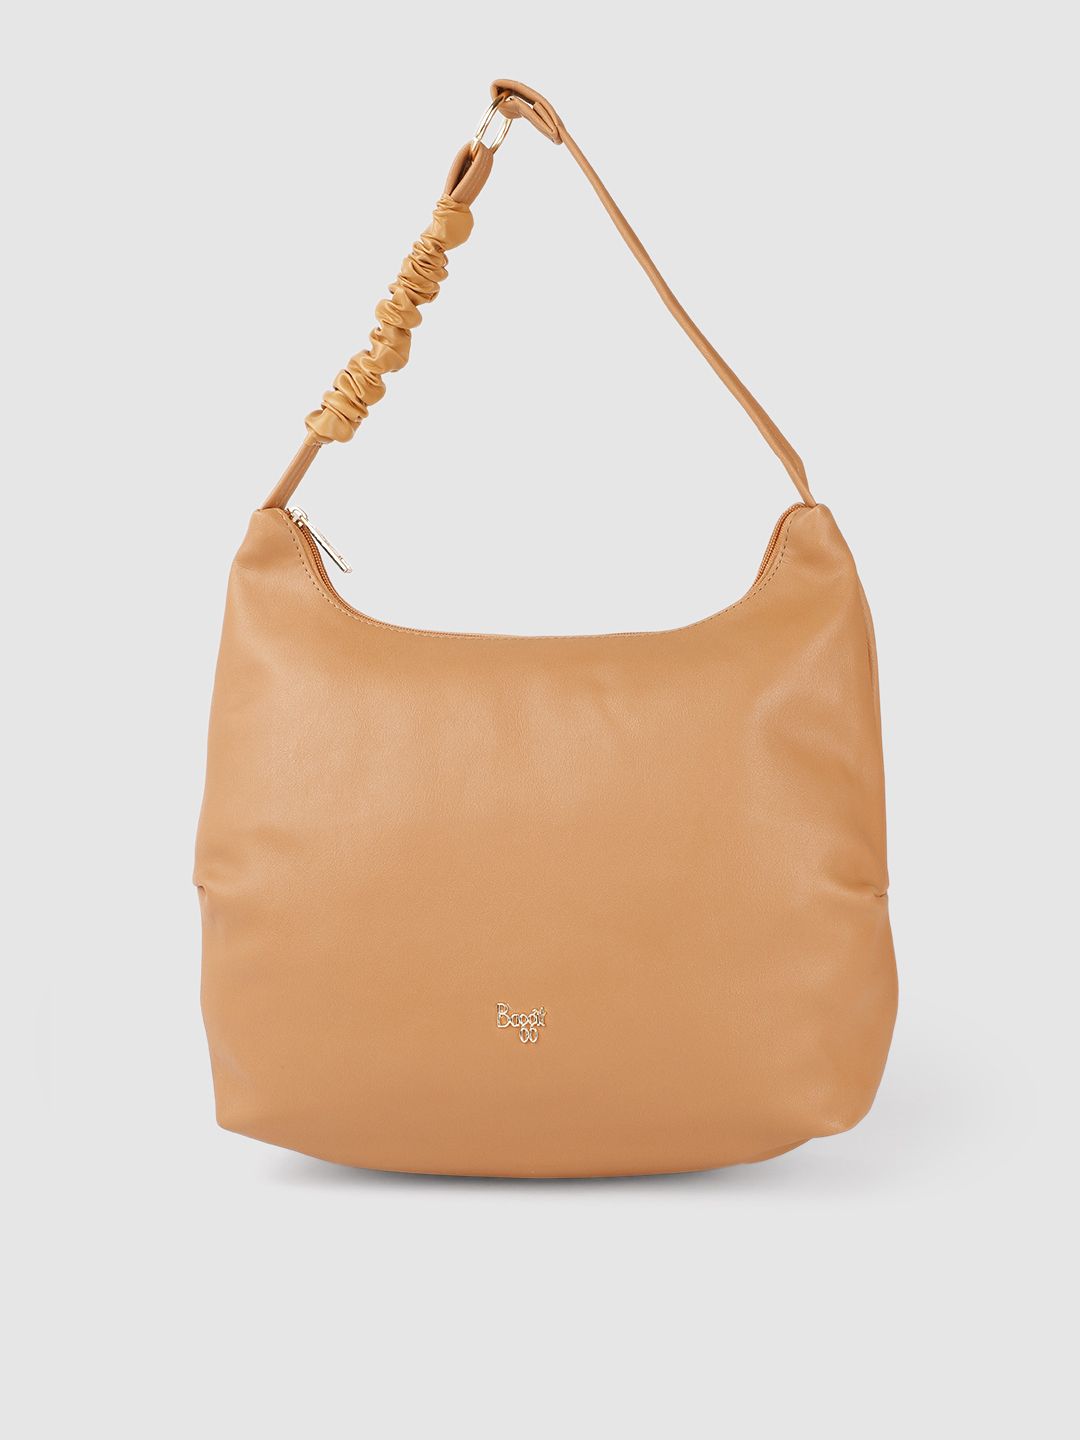 Baggit Beige Structured Hobo Bag Price in India